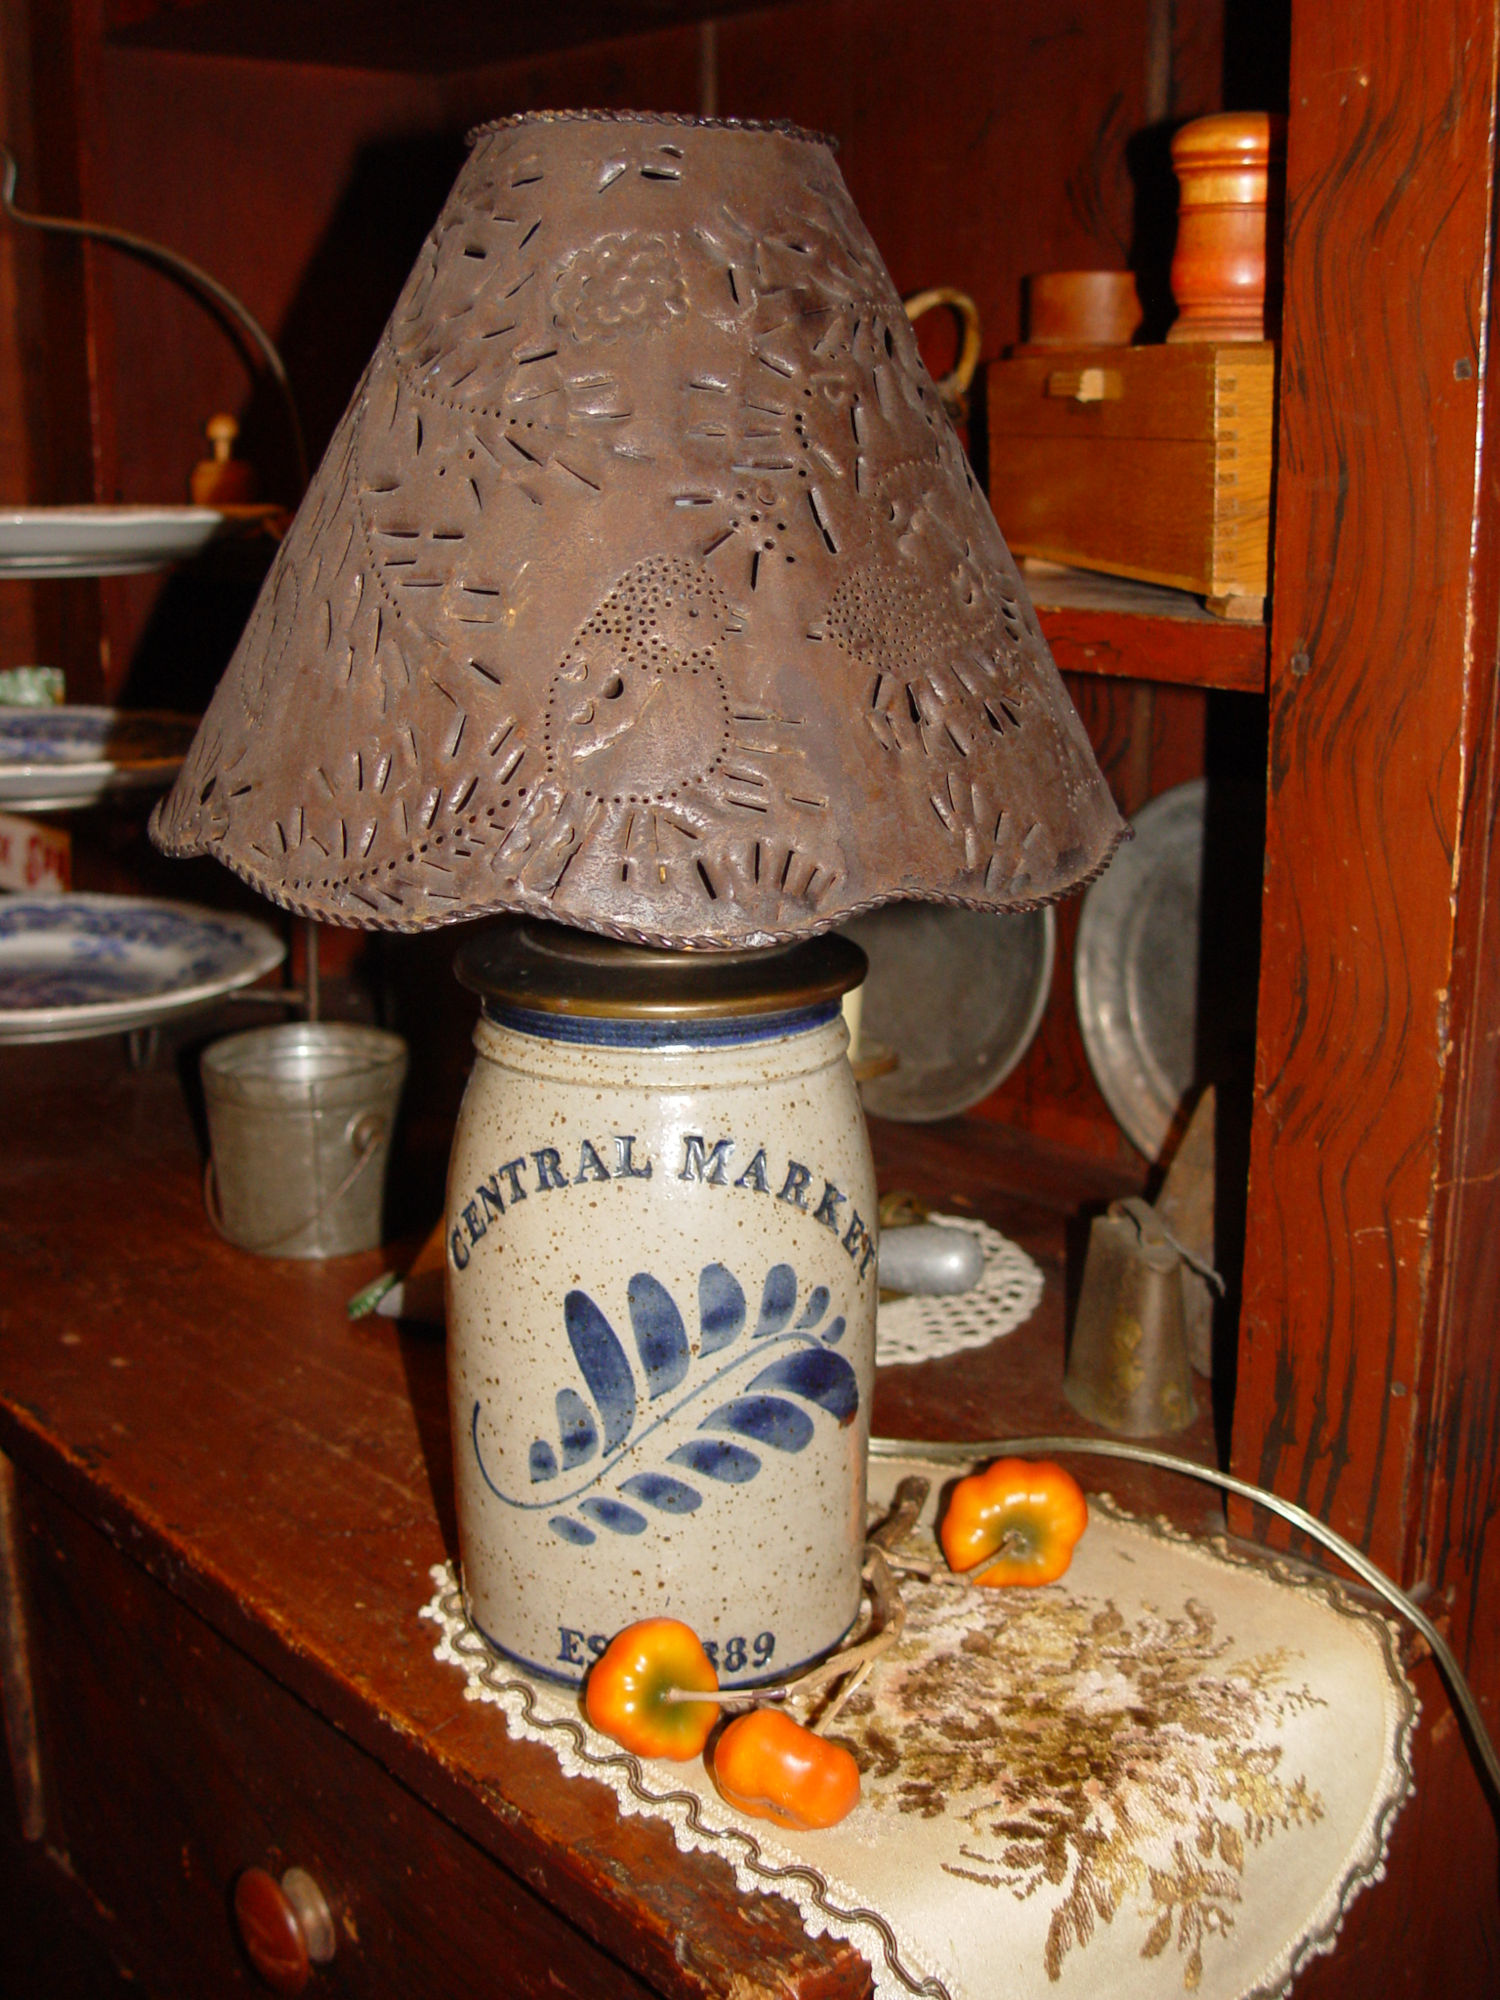 Central Market
                                                        PA, Salt Glazed
                                                        Stoneware Table
                                                        Lamp w/ Punched
                                                        Tin Shade